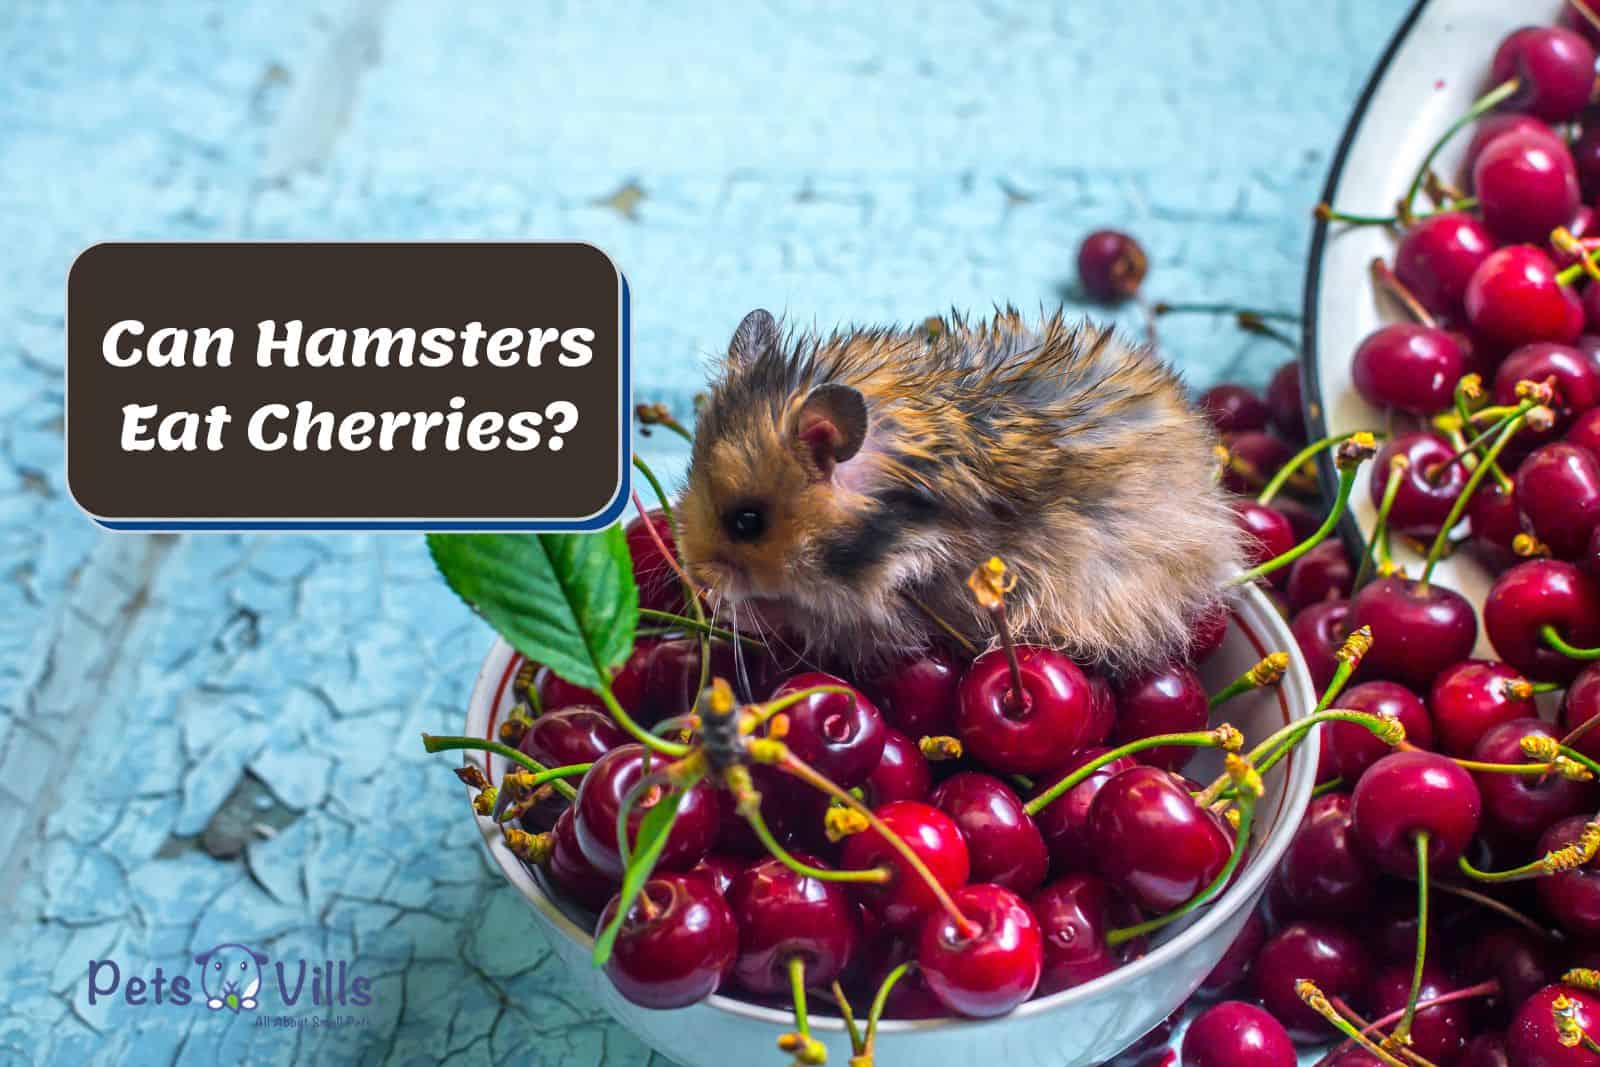 a hamster in a cherries bowl, can hamsters eat cherries